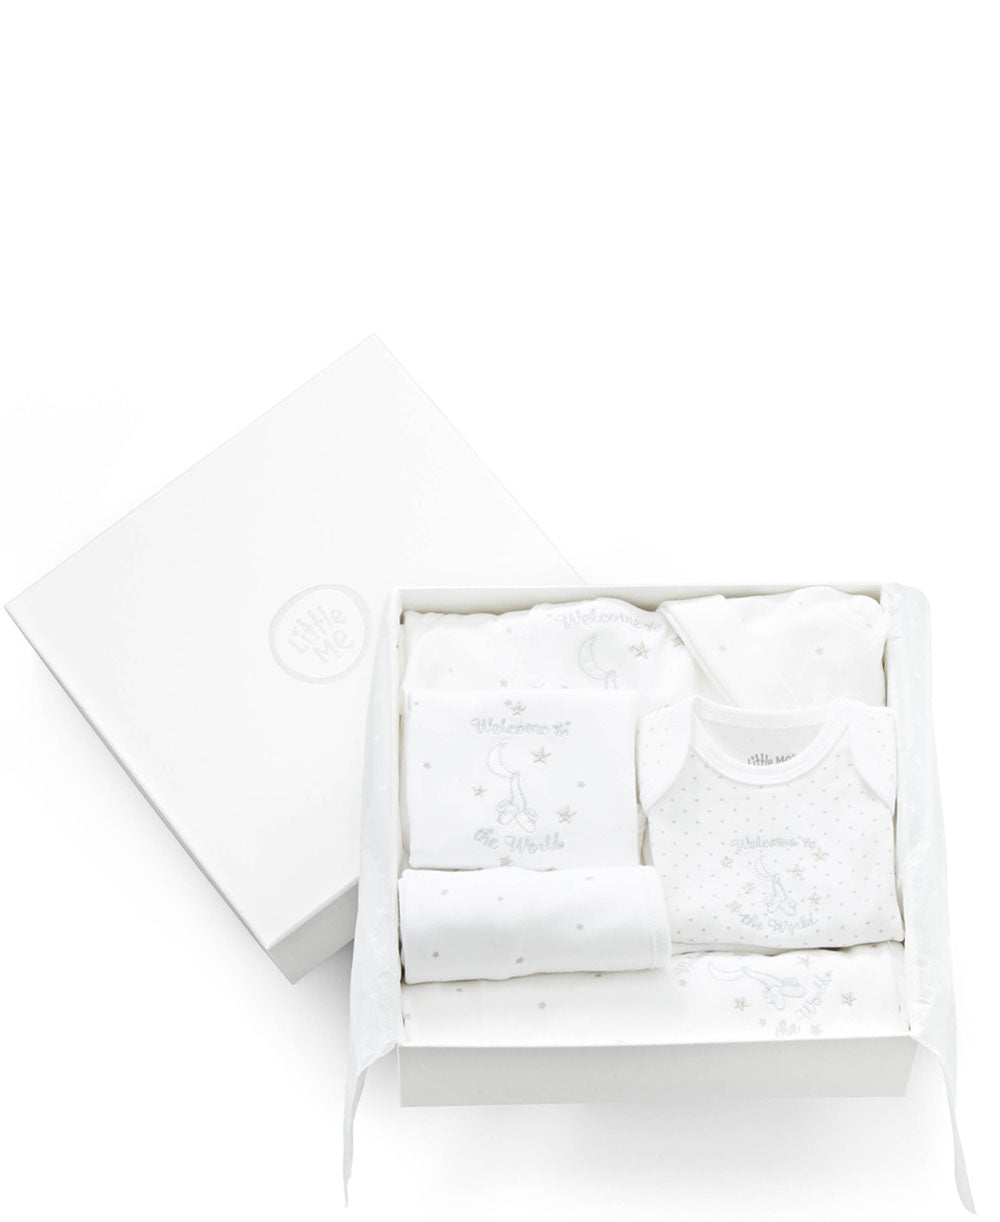 Welcome to the World Gift Box Set - Little Me